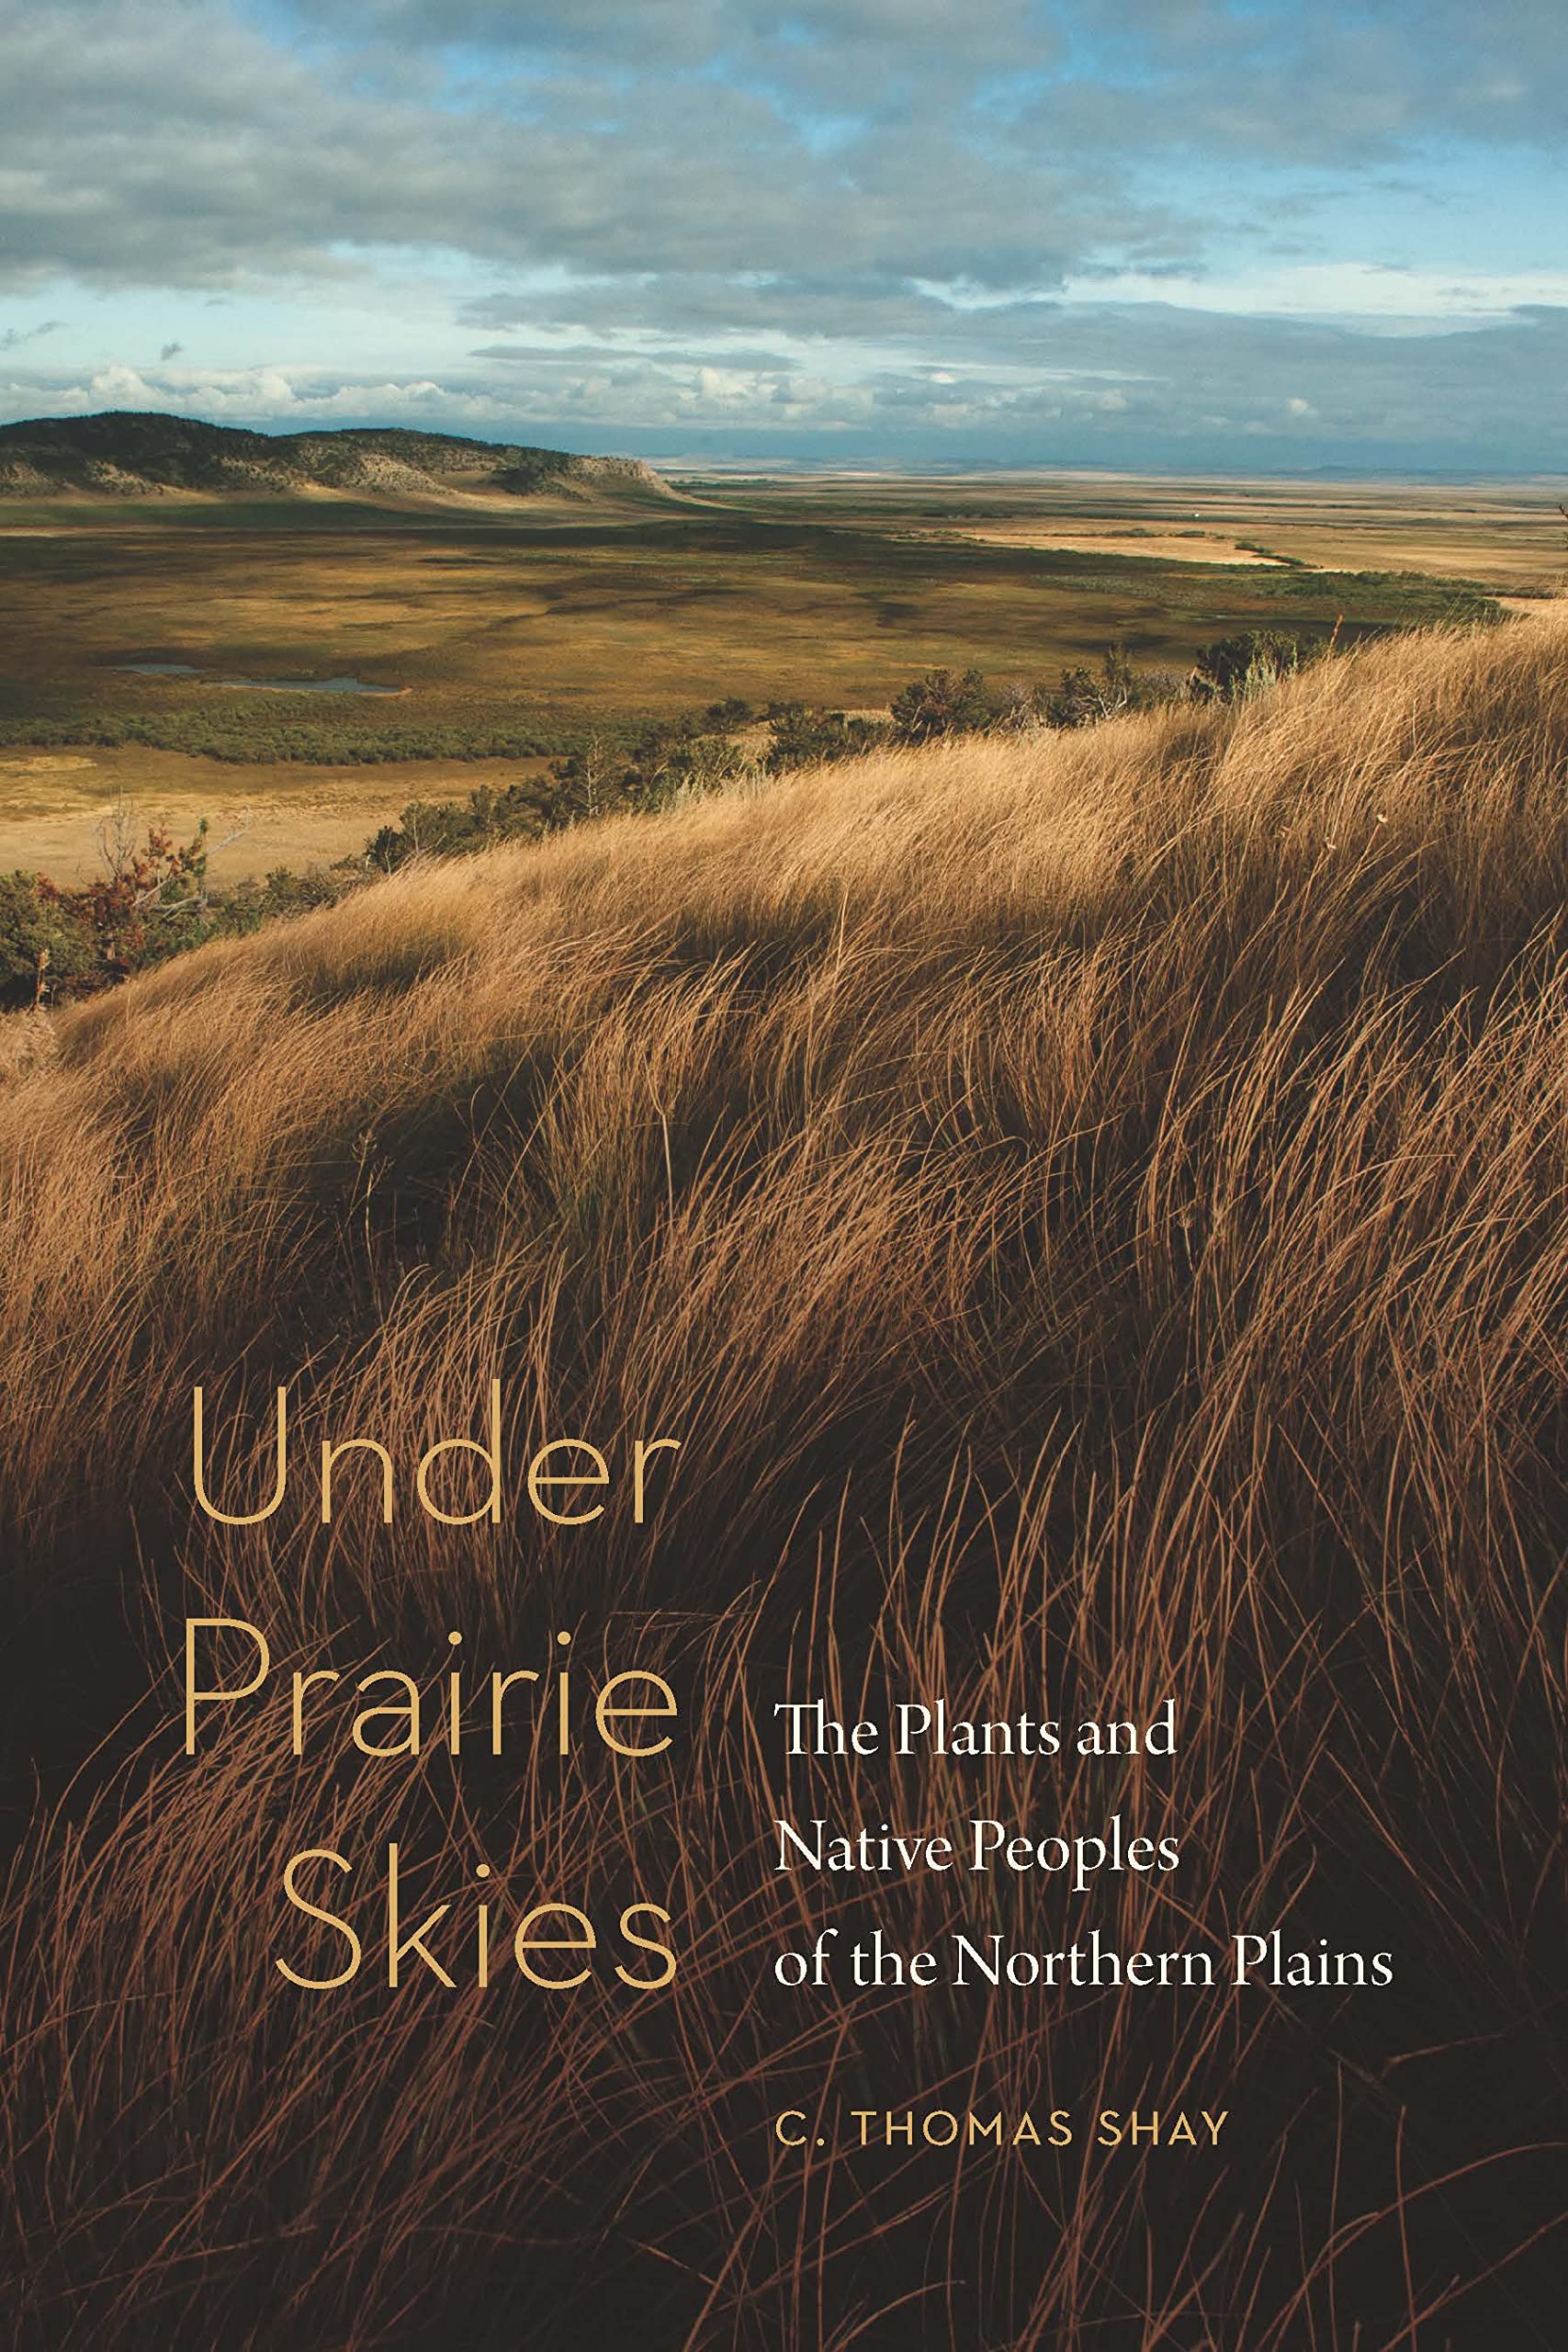 Cover photo of rolling prairie with cloudy sky in the distance.